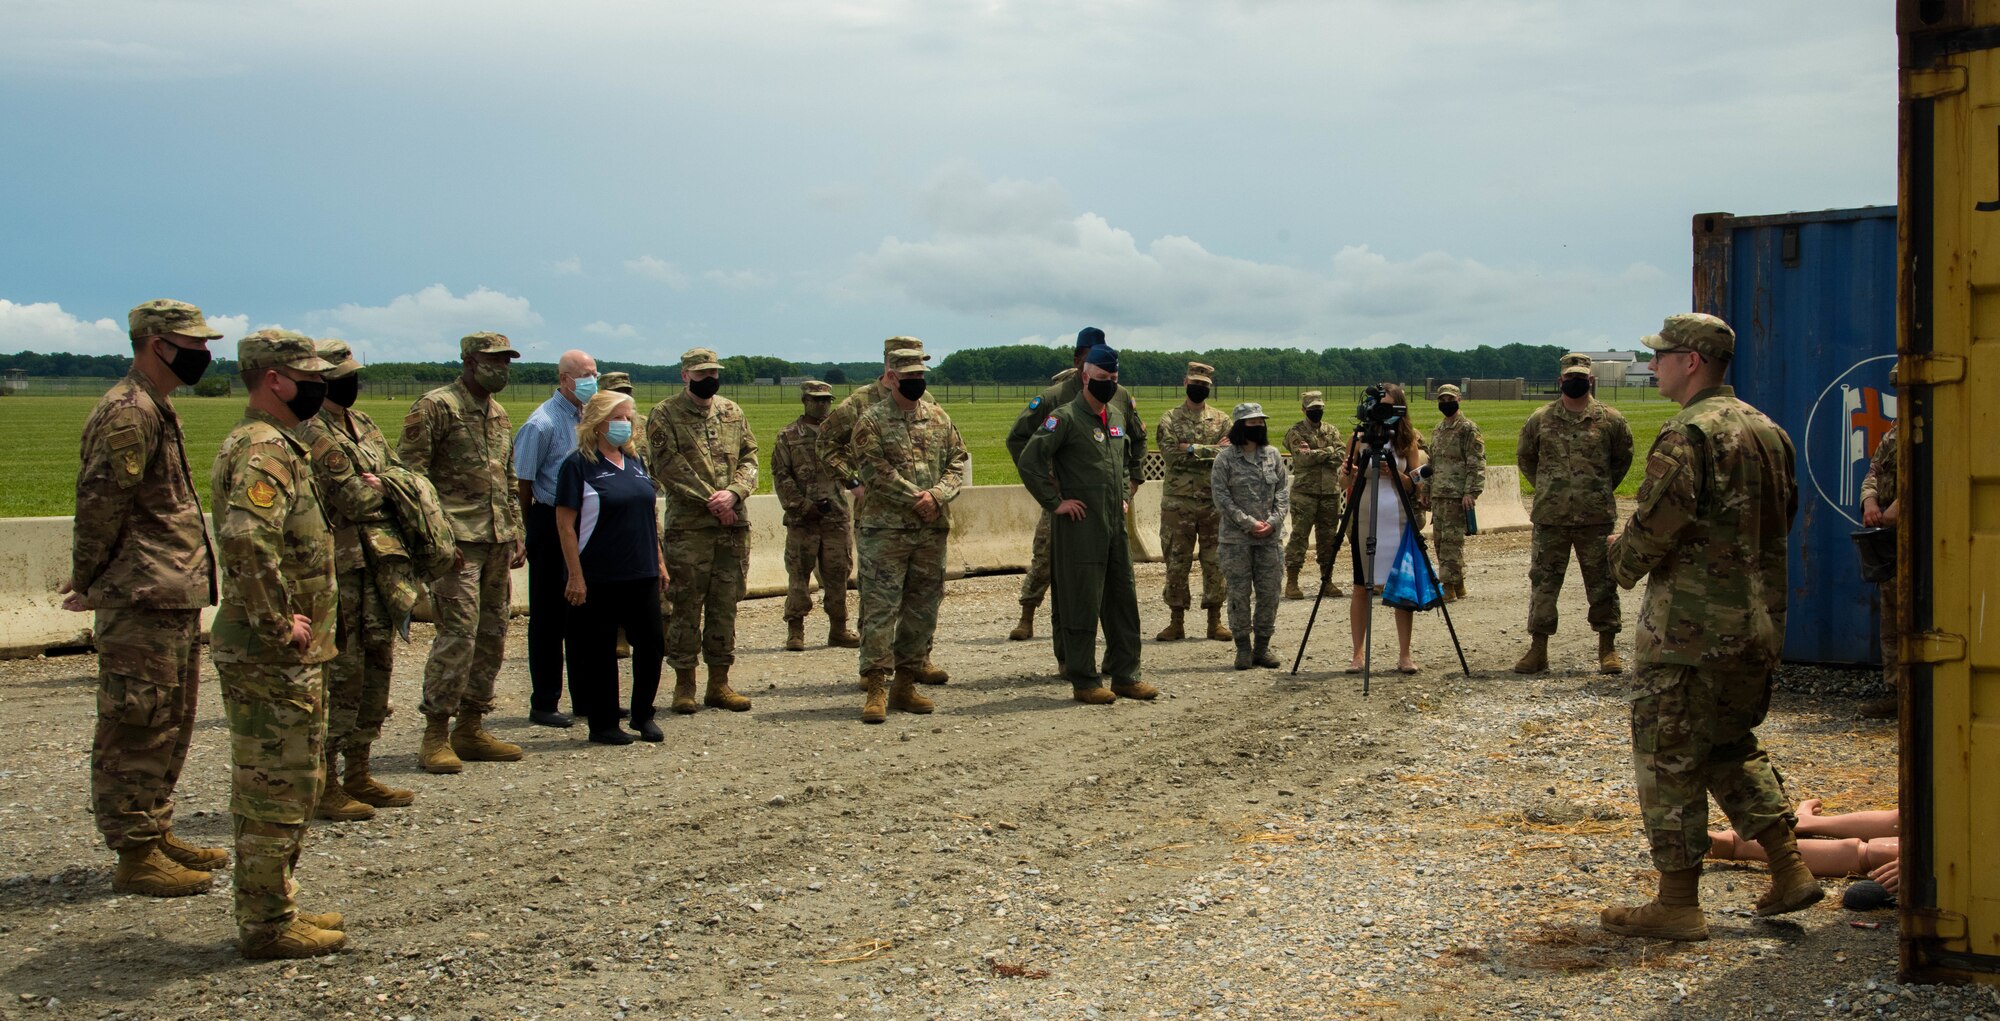 Team Dover held a ribbon-cutting ceremony for the Tactics and Leadership Nexus, a first-of-its-kind permanent integrated combat and leadership training facility on base, July 24, 2020.